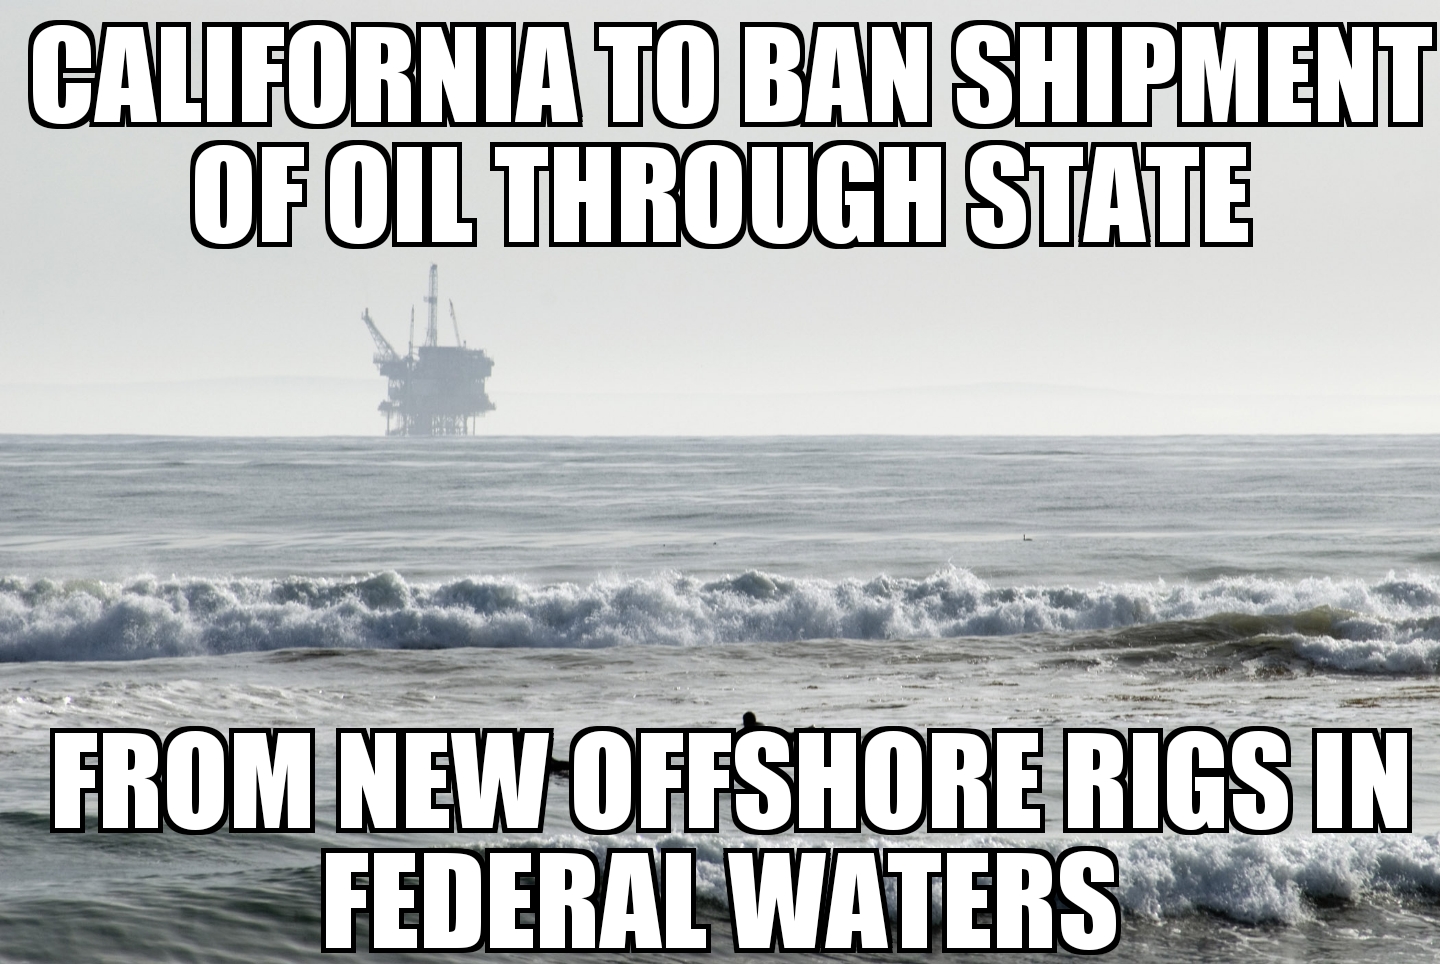 California to ban petroleum from new oil rigs